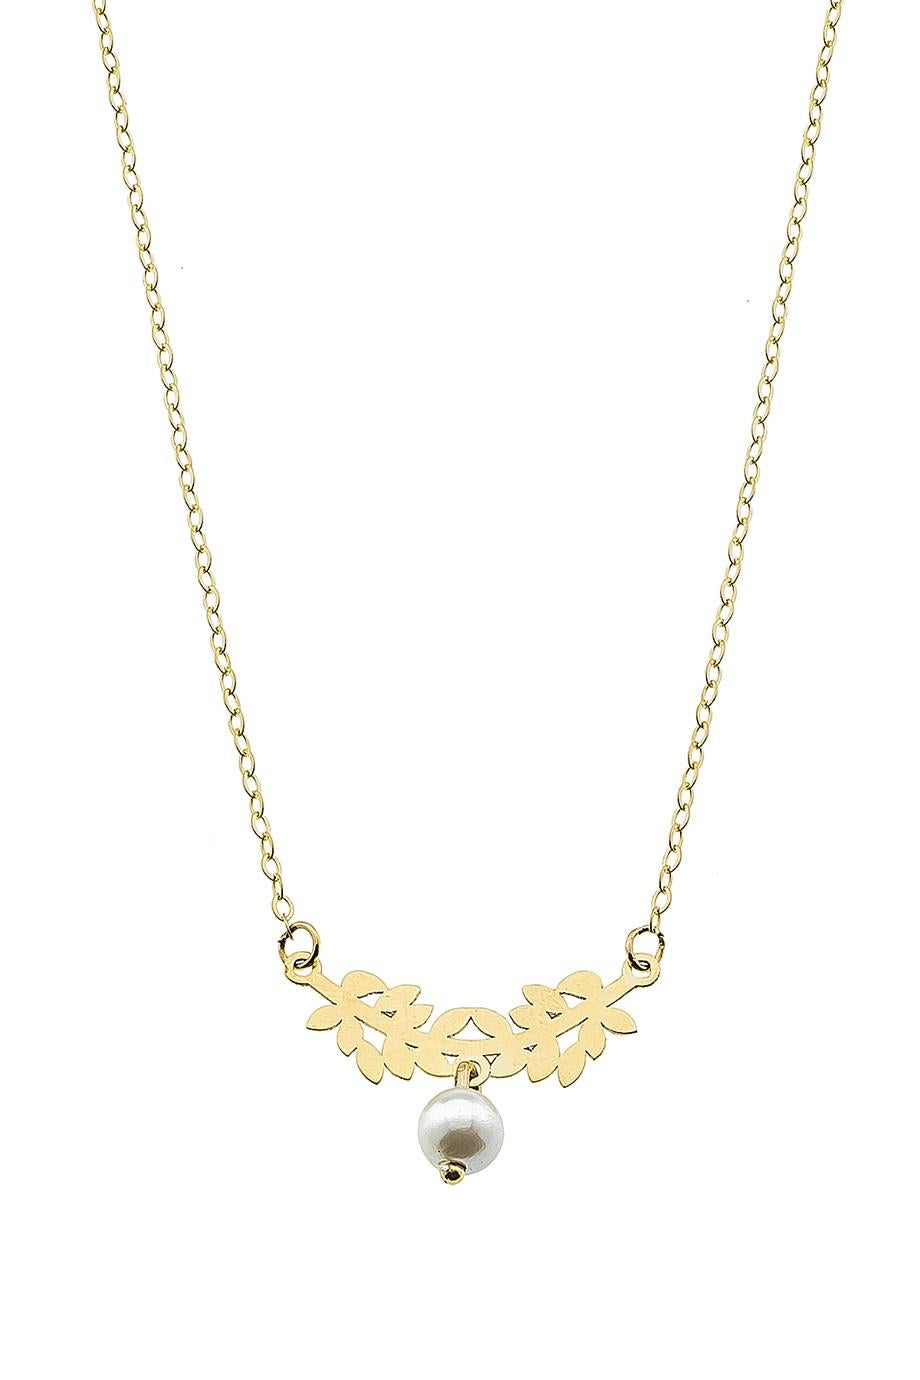 Ball Cut 14k gold neckace with pearl For Sale